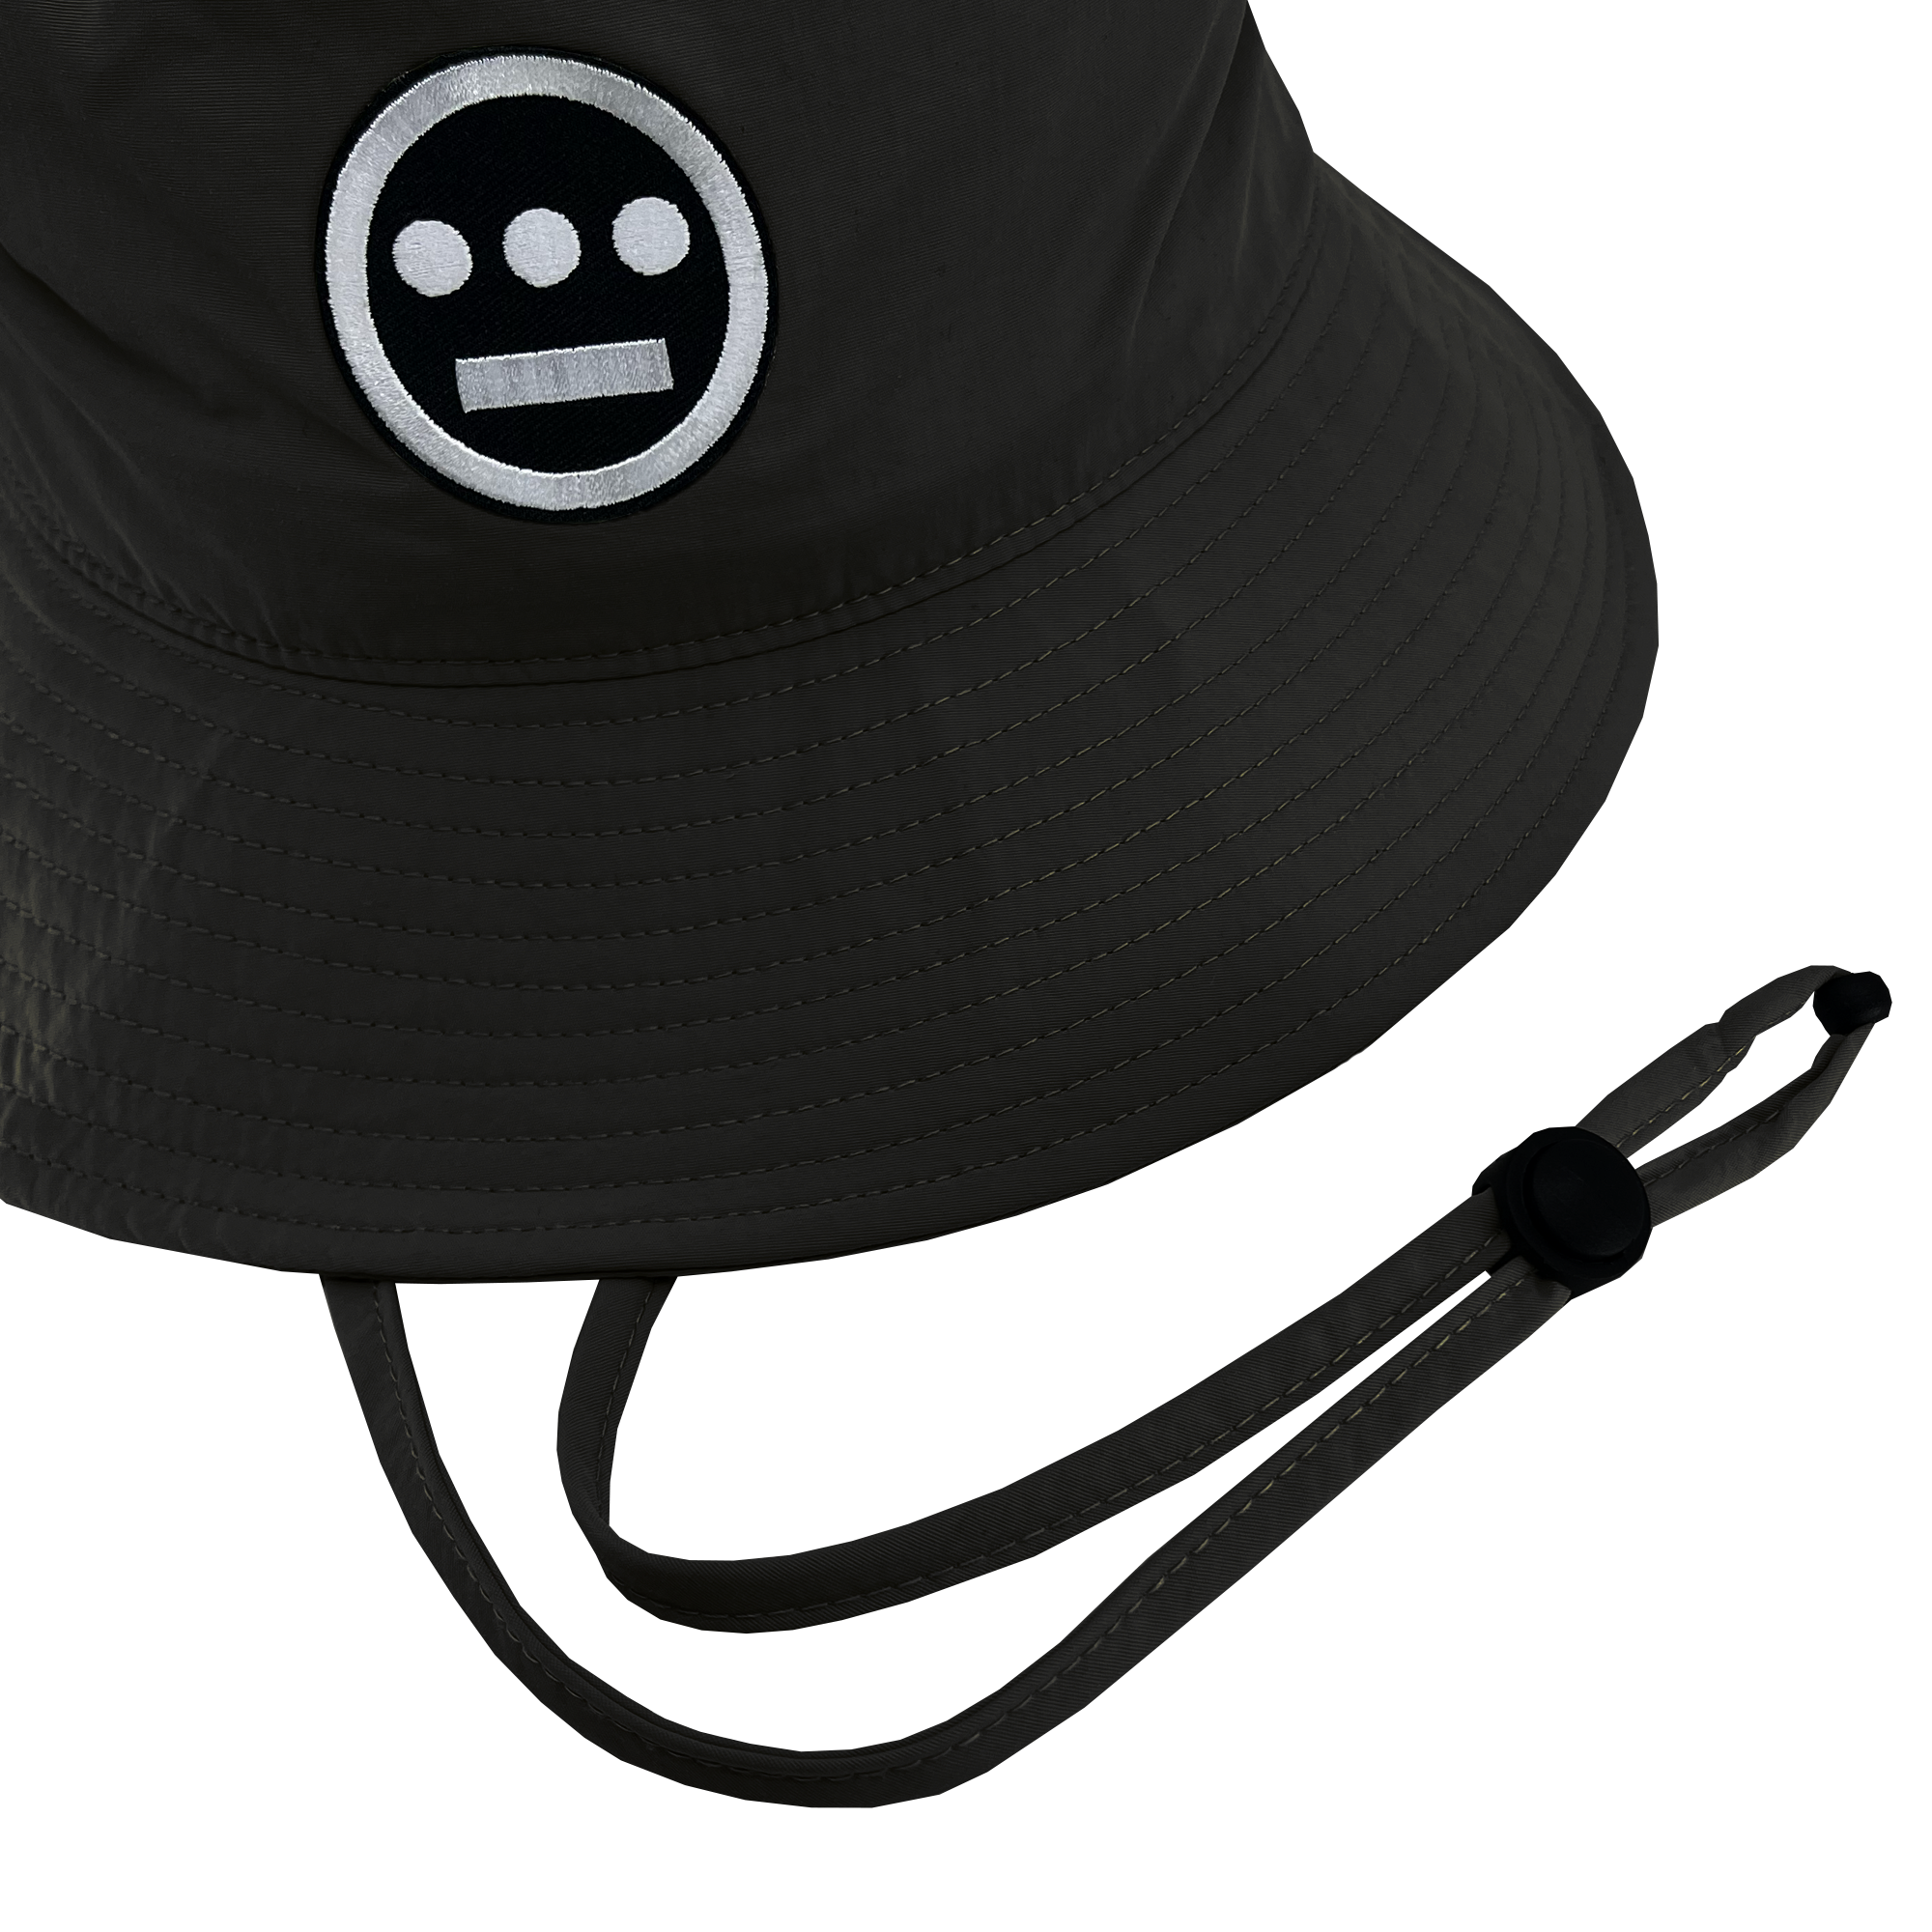 Detailed view of wide brim black bucket hat with toggles and Hiero logo patch .